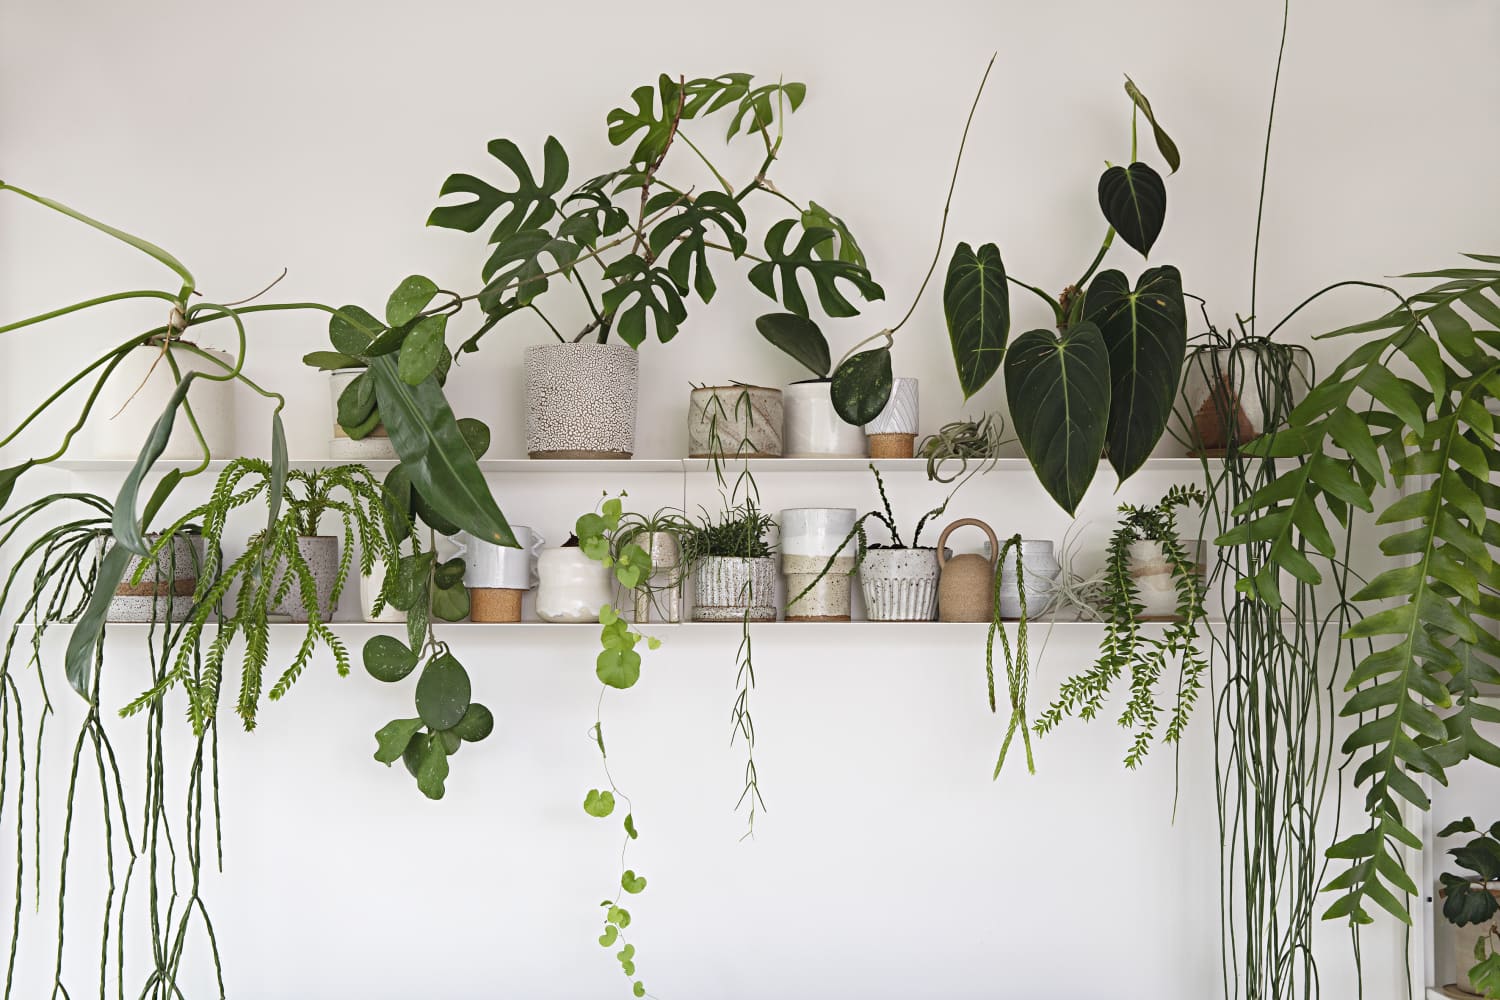 Your New Favorite Small-Space DIY Plant Display Is Already in Your Shower